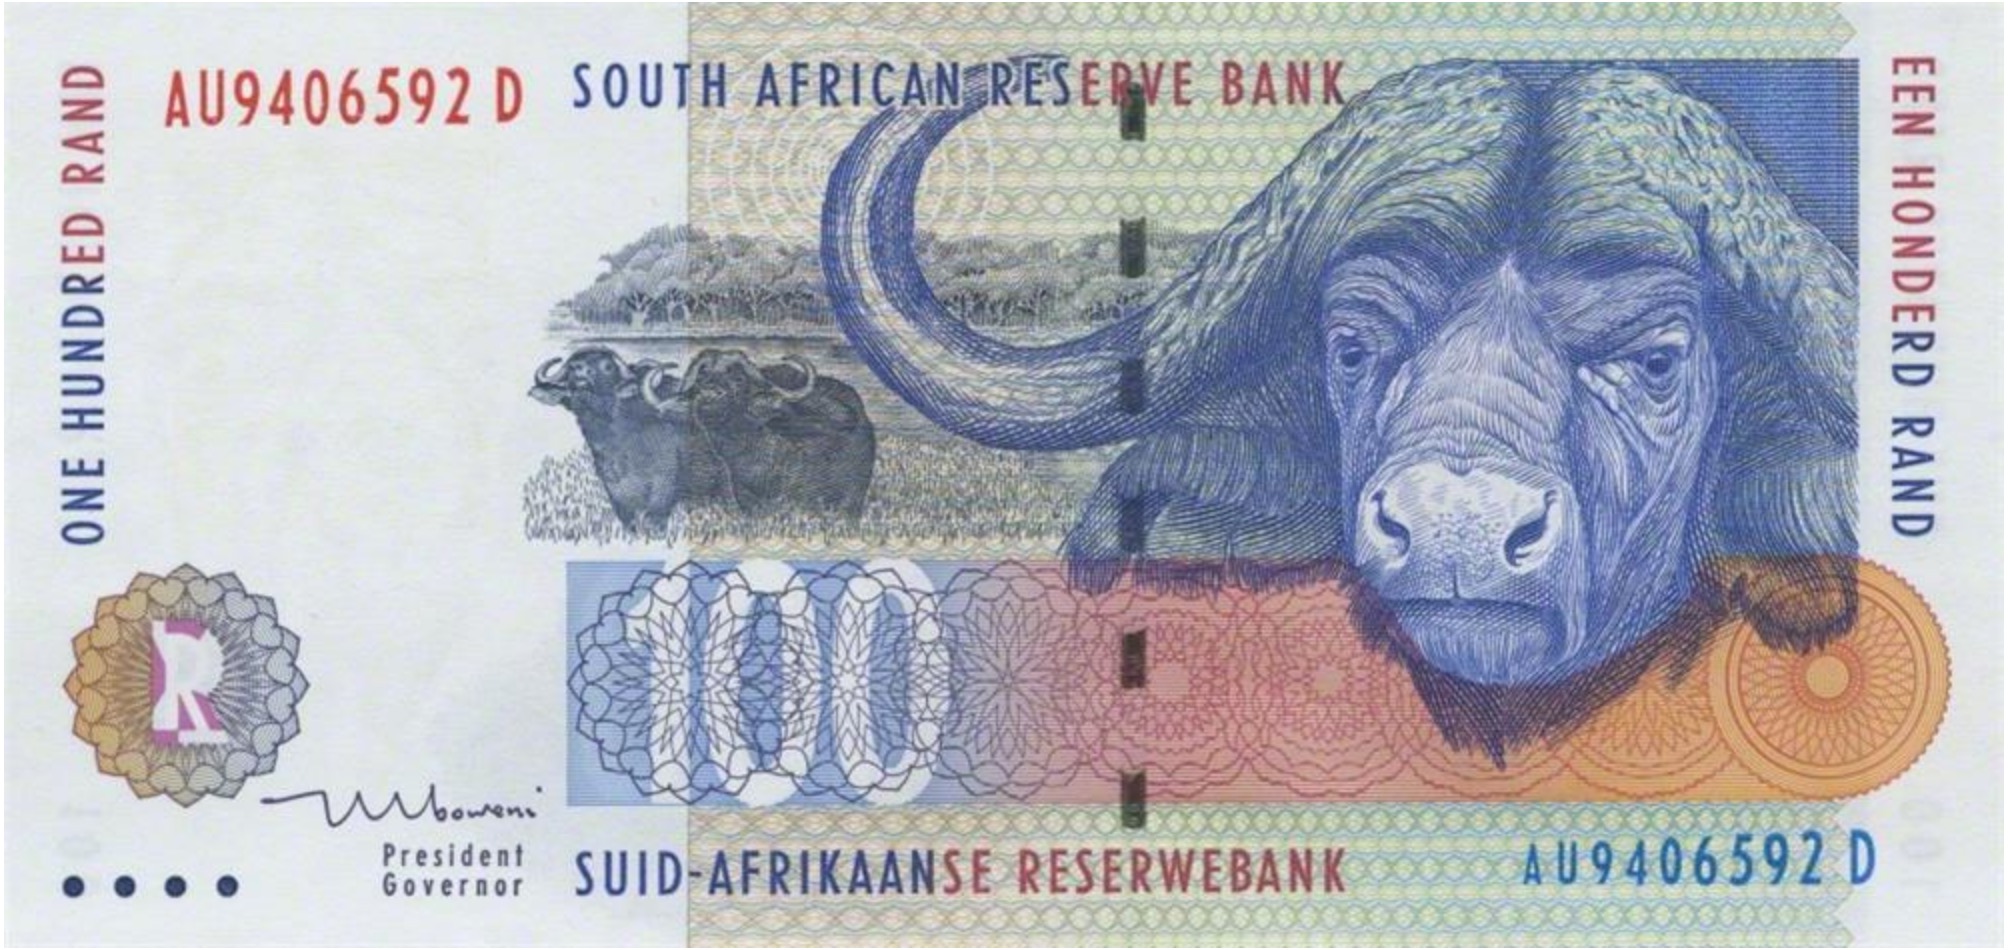 100 South African Rand banknote (Buffalo type 1994)